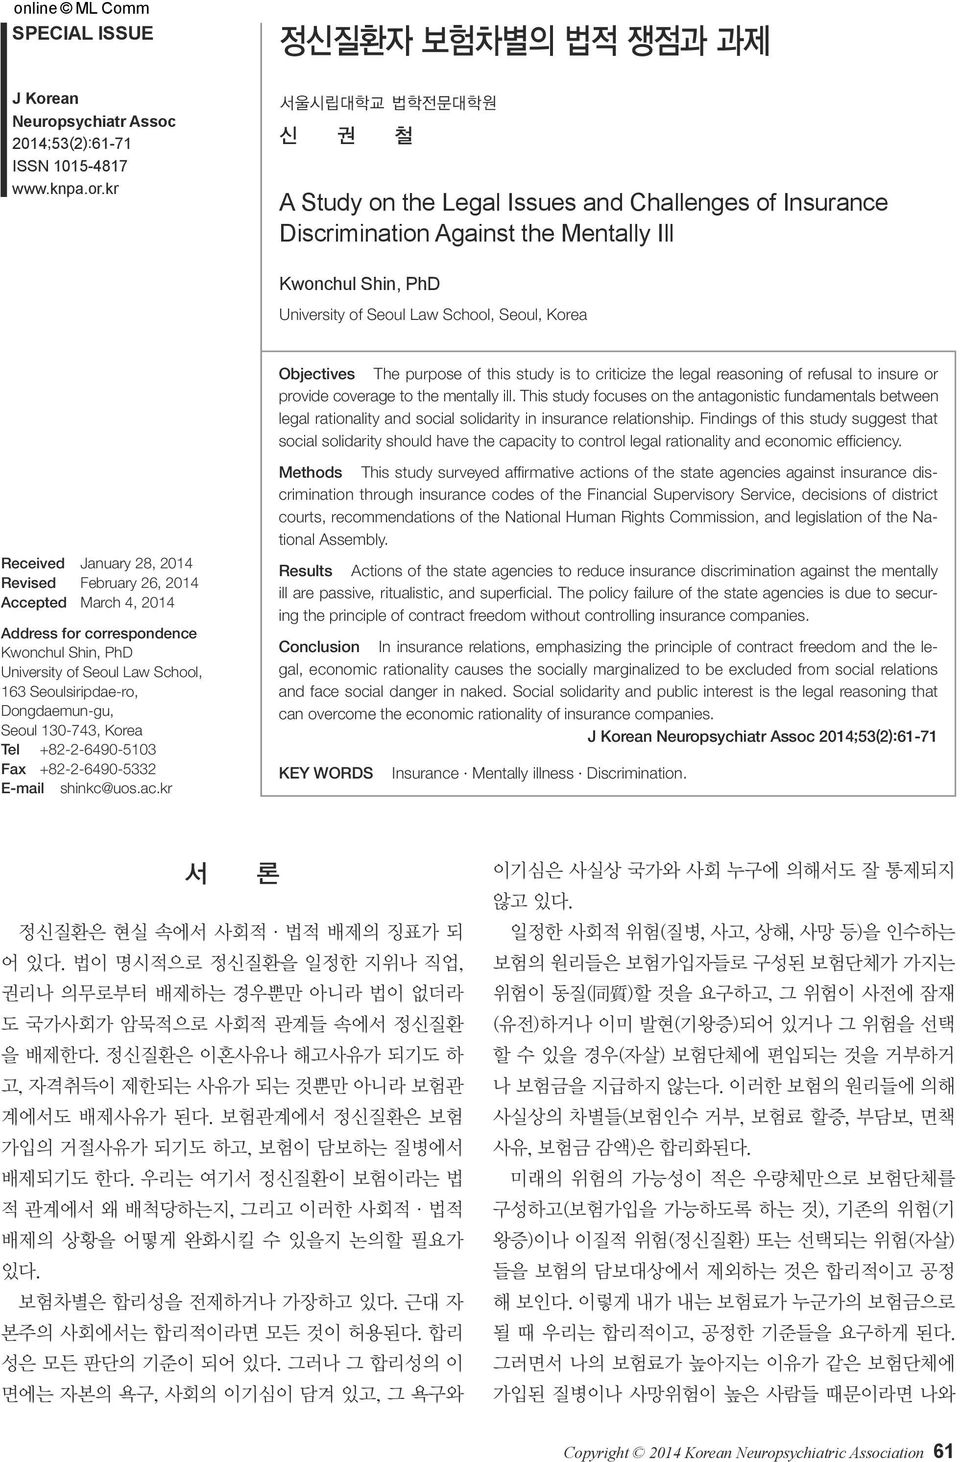 kr 서울시립대학교 법학전문대학원 신 권 철 A Study on the Legal Issues and Challenges of Insurance Discrimination Against the Mentally Ill Kwonchul Shin, PhD University of Seoul Law School, Seoul, Korea